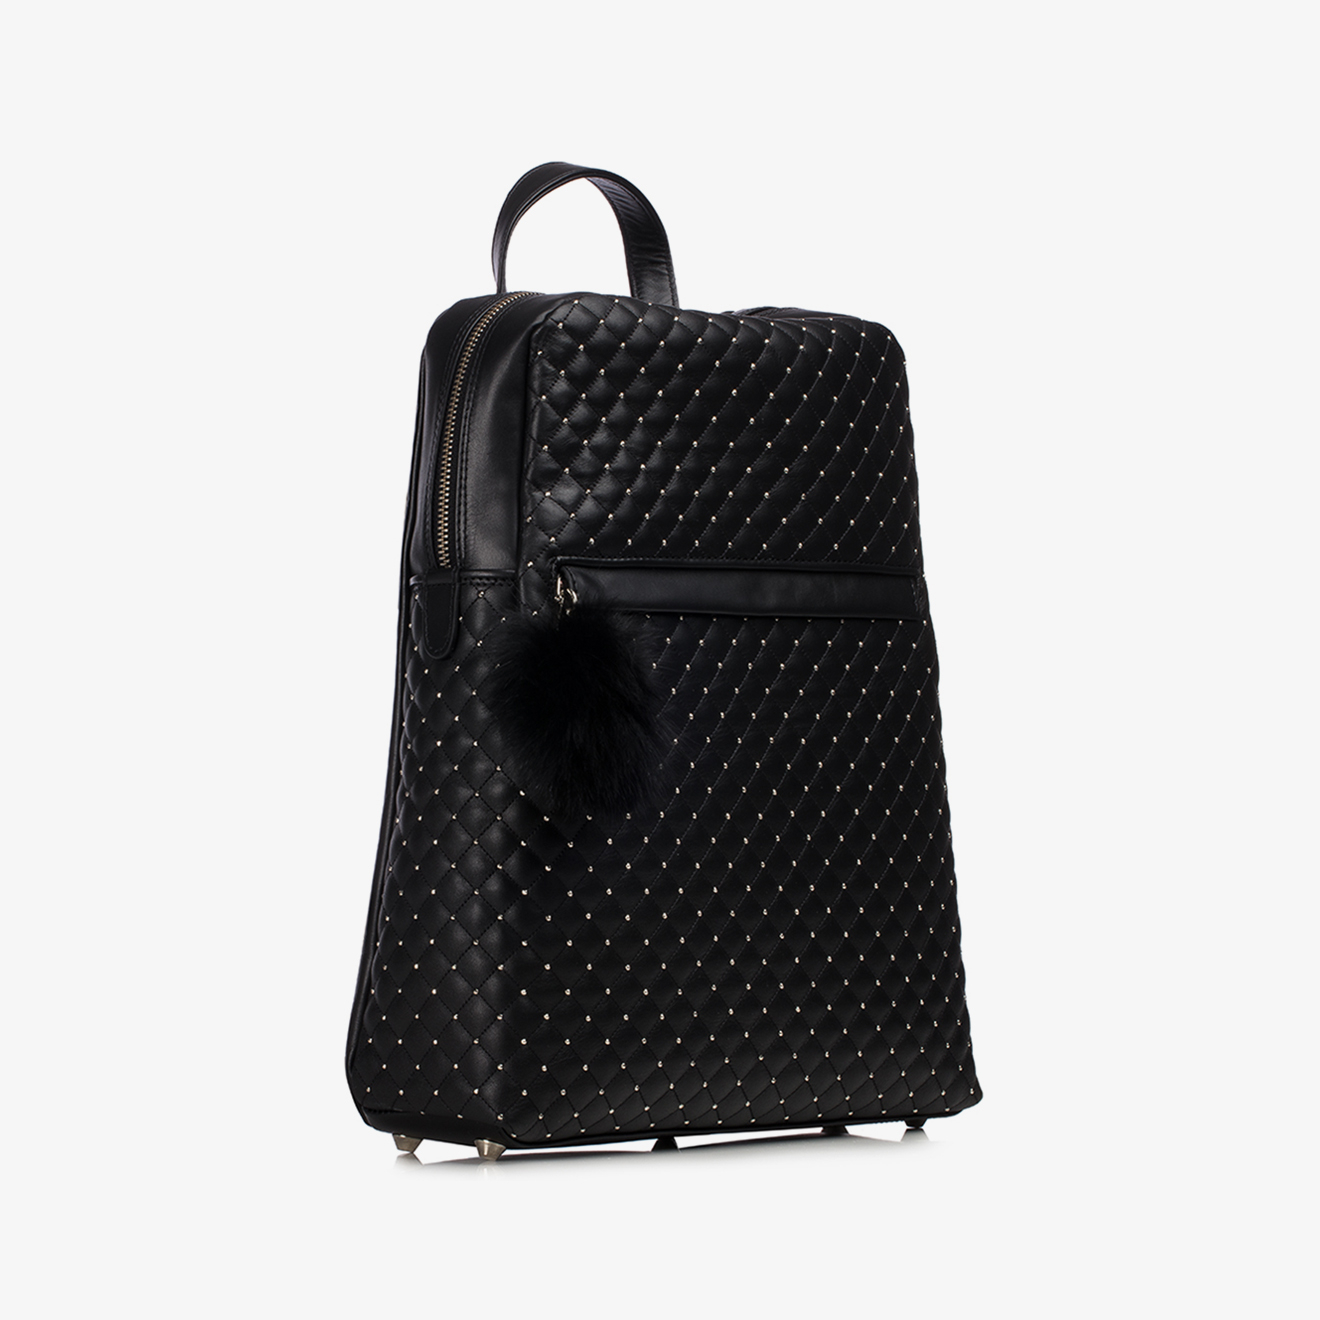 BLEIS BACKPACK - Le Silla official outlet